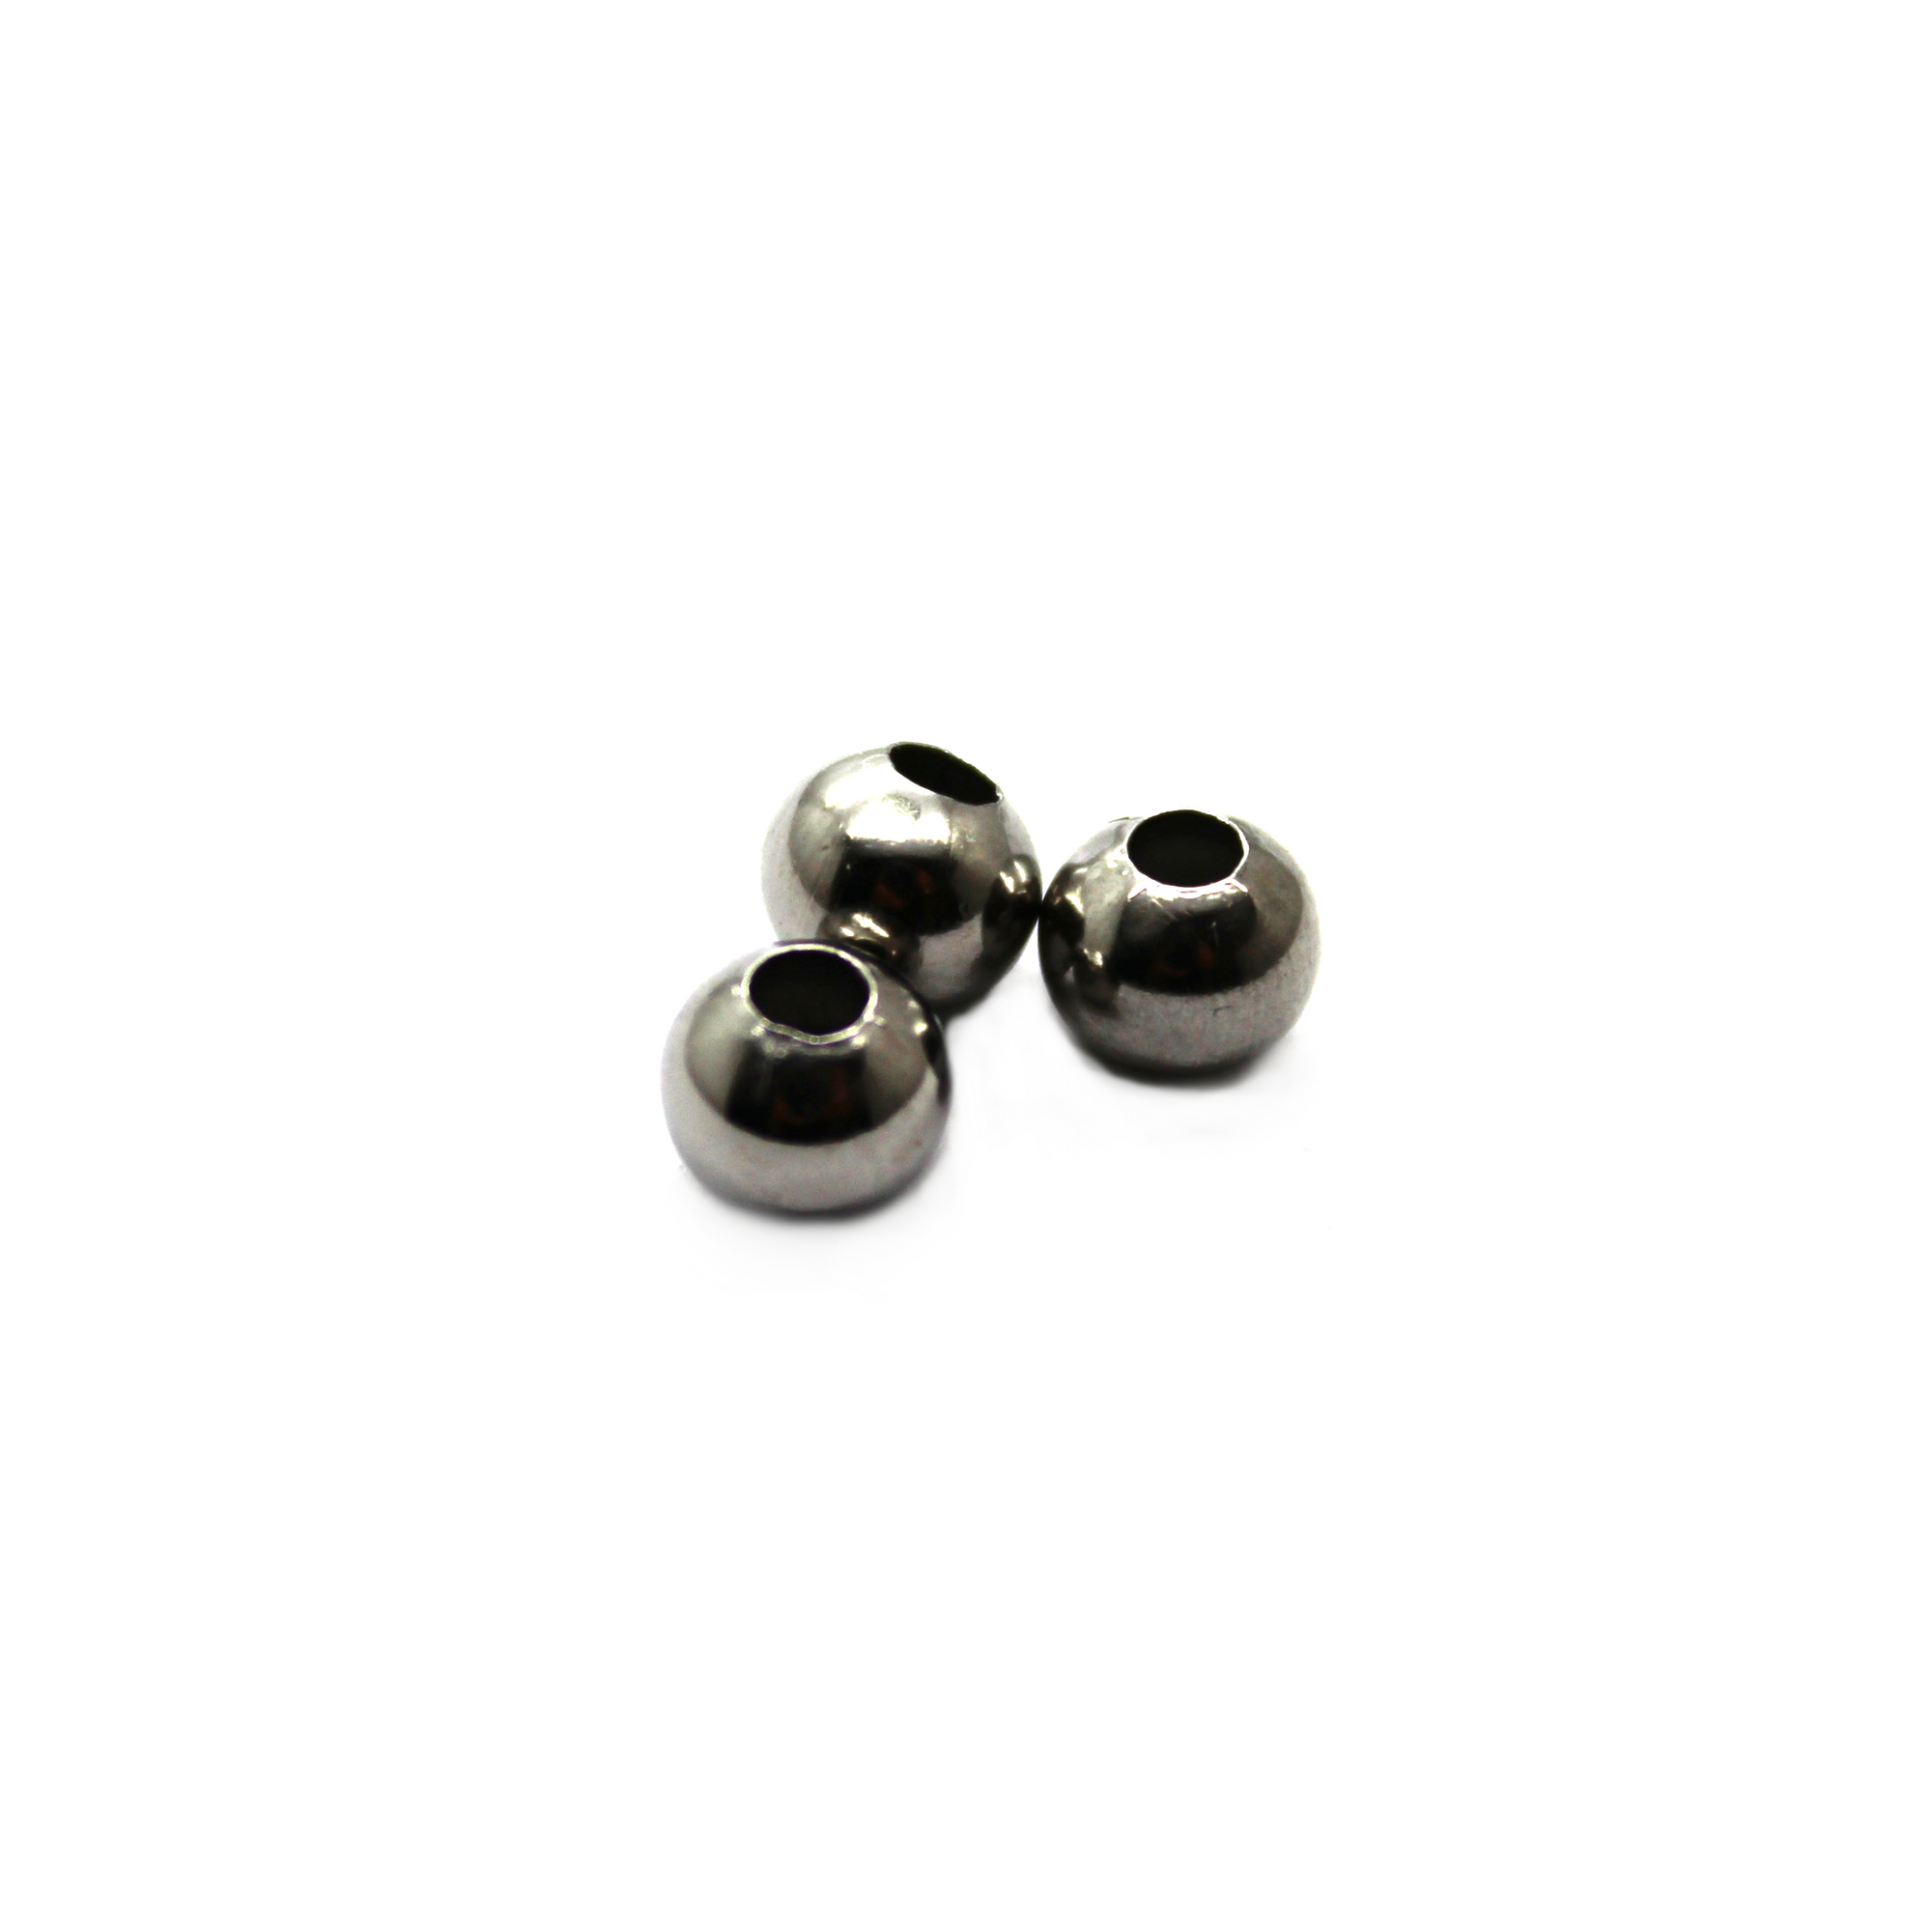 Plain Round Spacer, Stainless Steel, 3.8mm x 4.1mm x .8mm, 24 pcs/bag